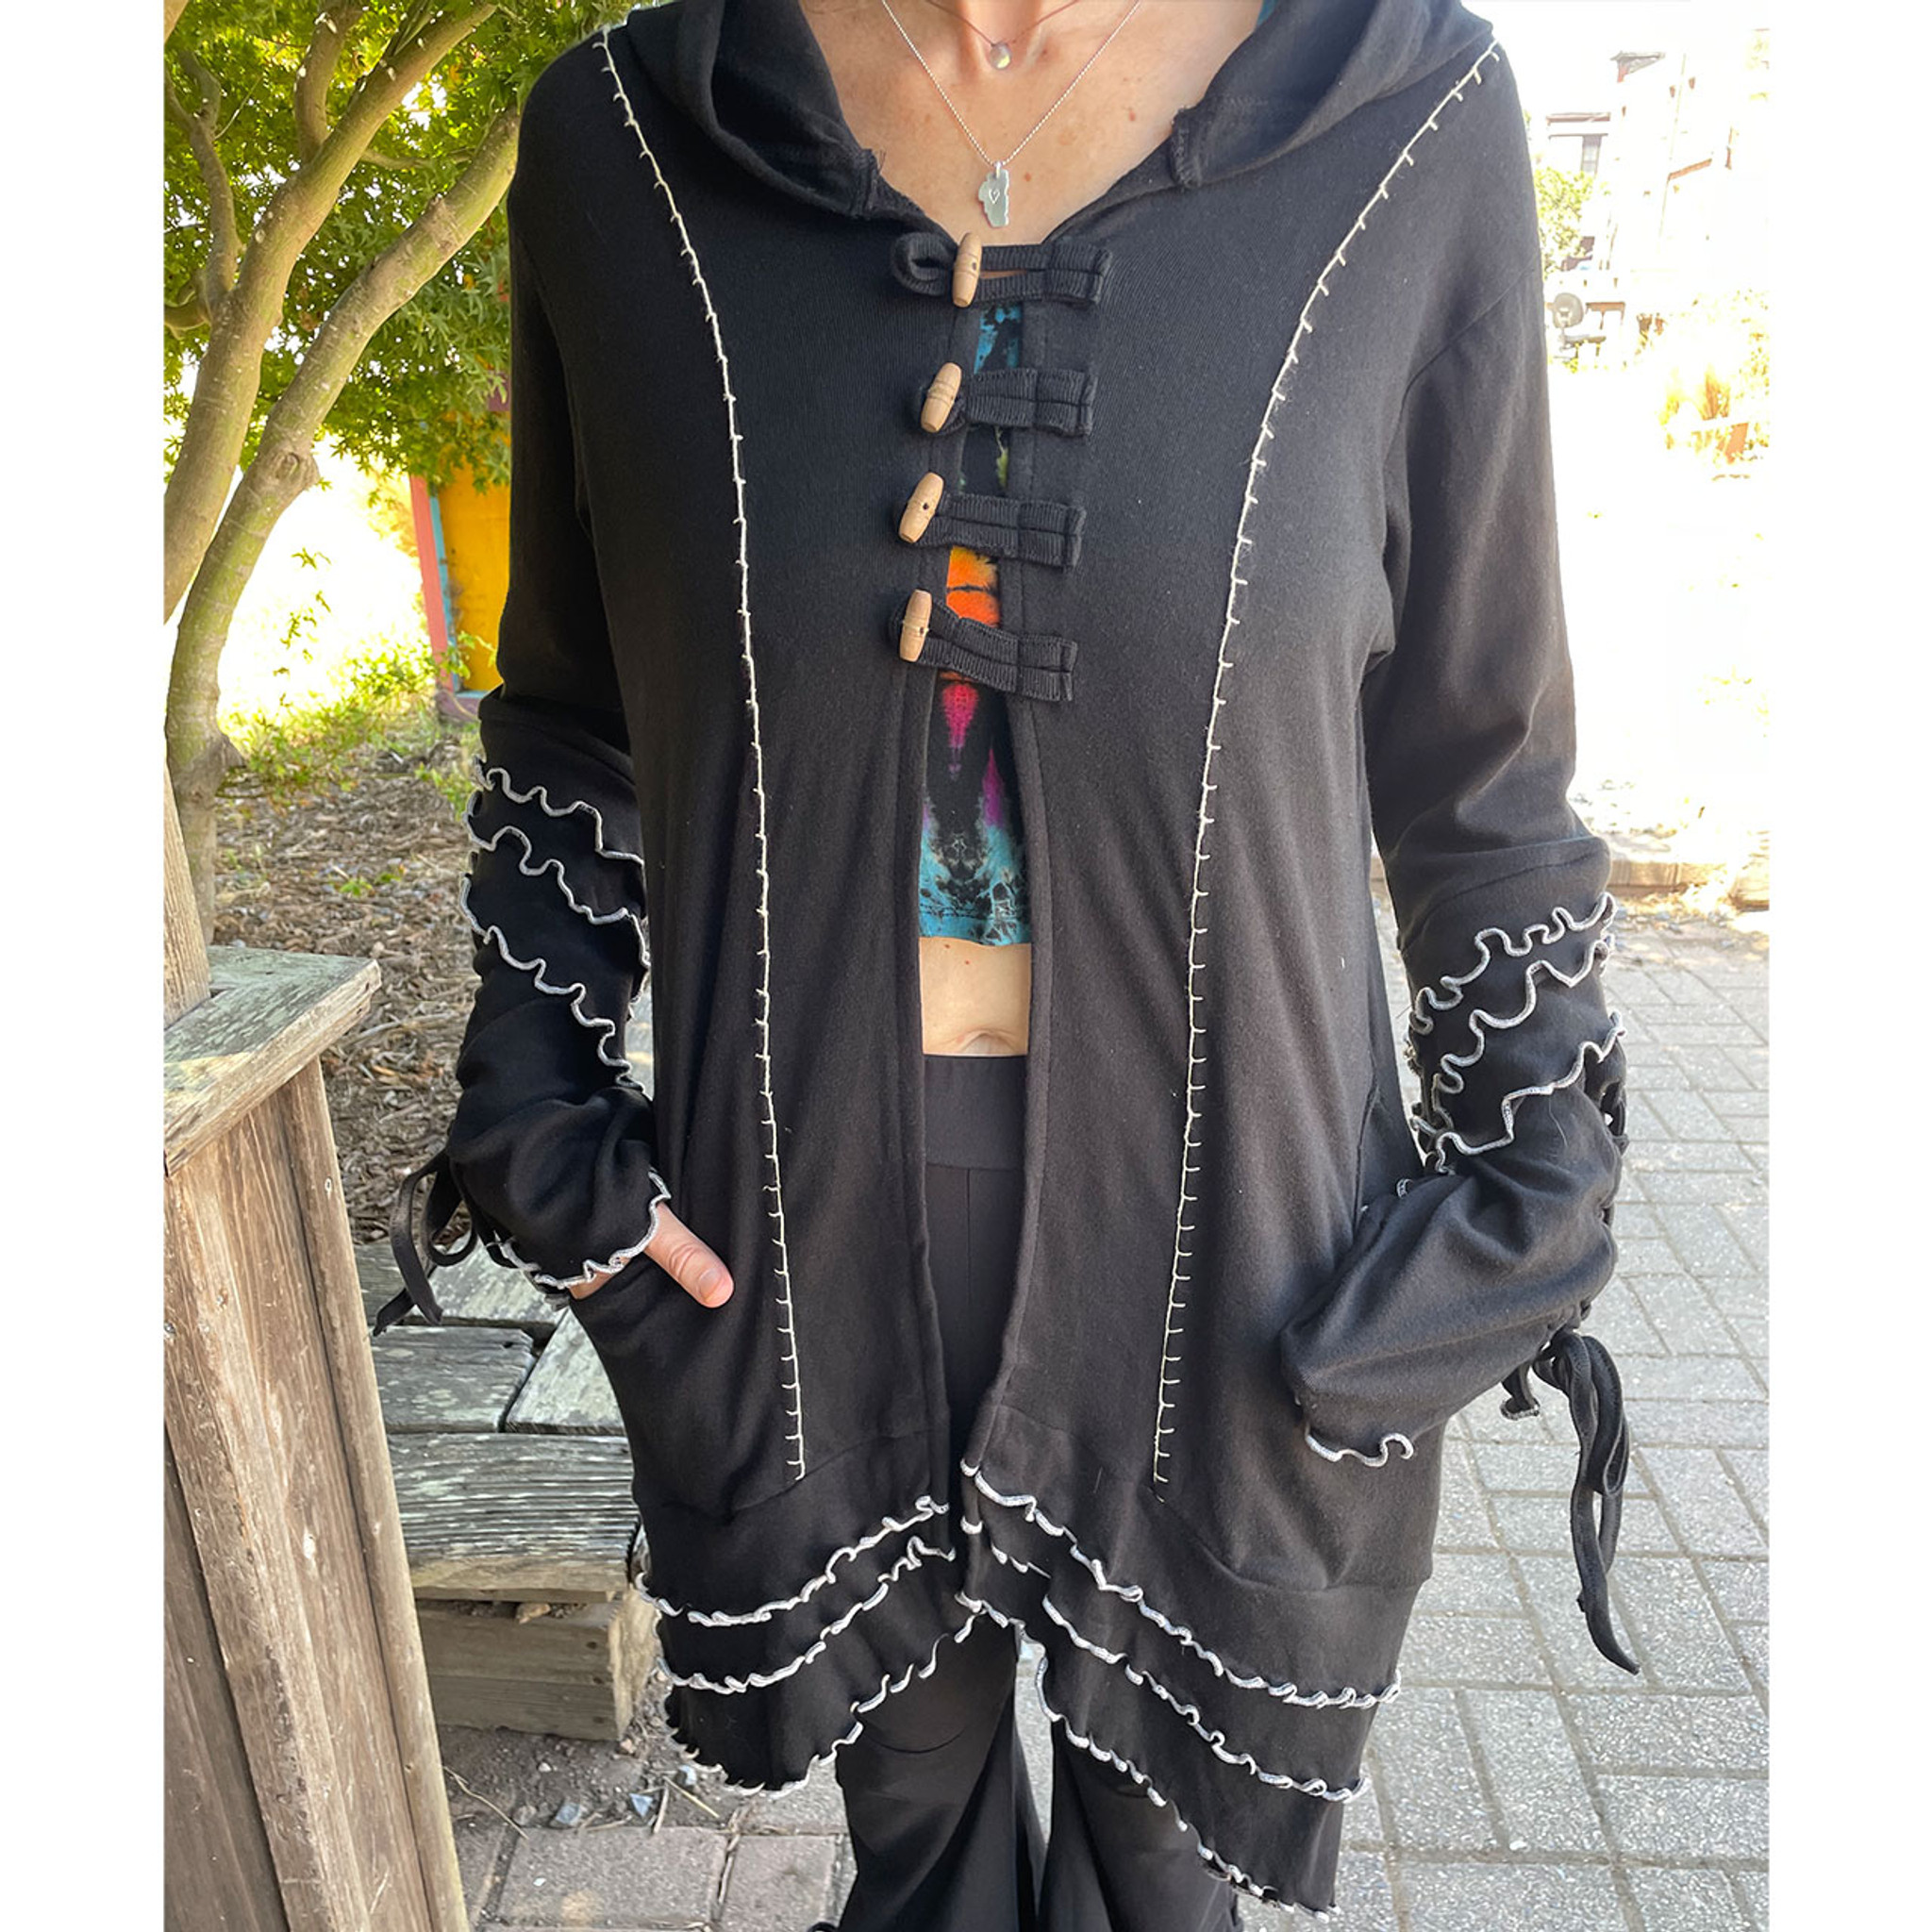 STITCH IN TIME COVER UP Cotton Multi Ruffle Hooded Cover Up Jacket  w/ Side Pockets & Outer Stitching